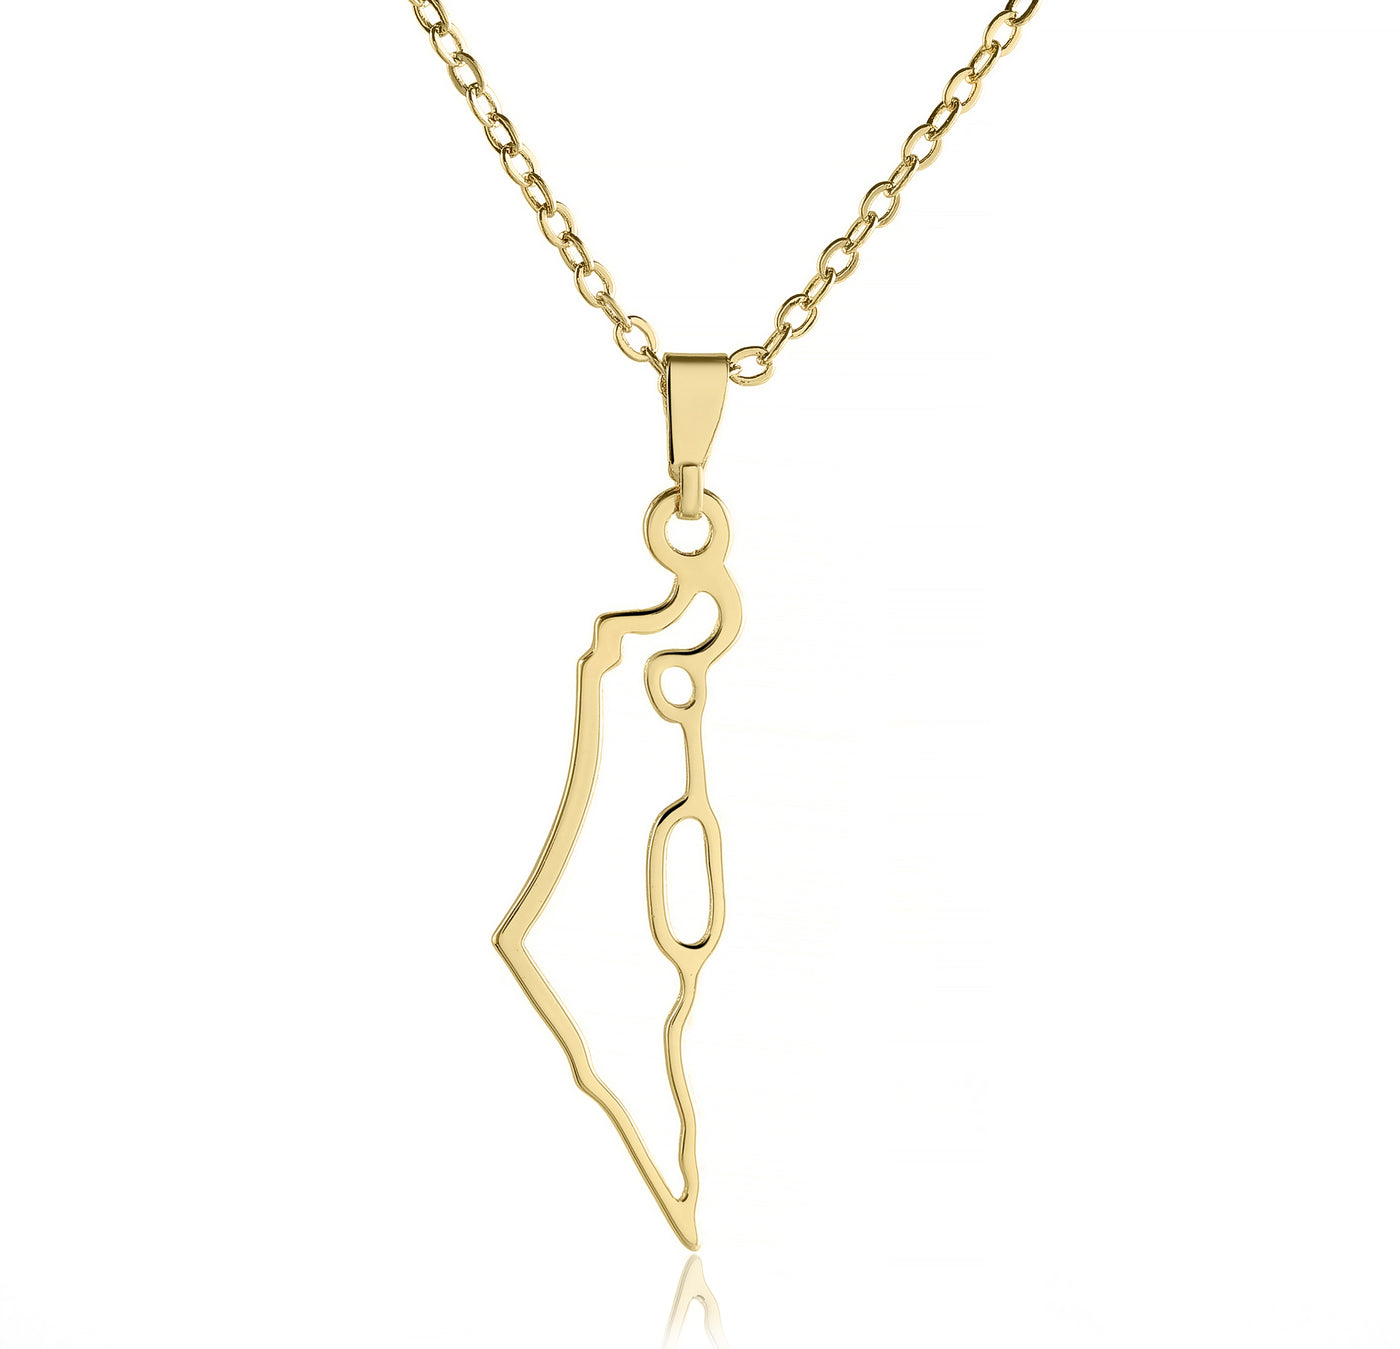 Israel Map Necklace in a classic design - Michal